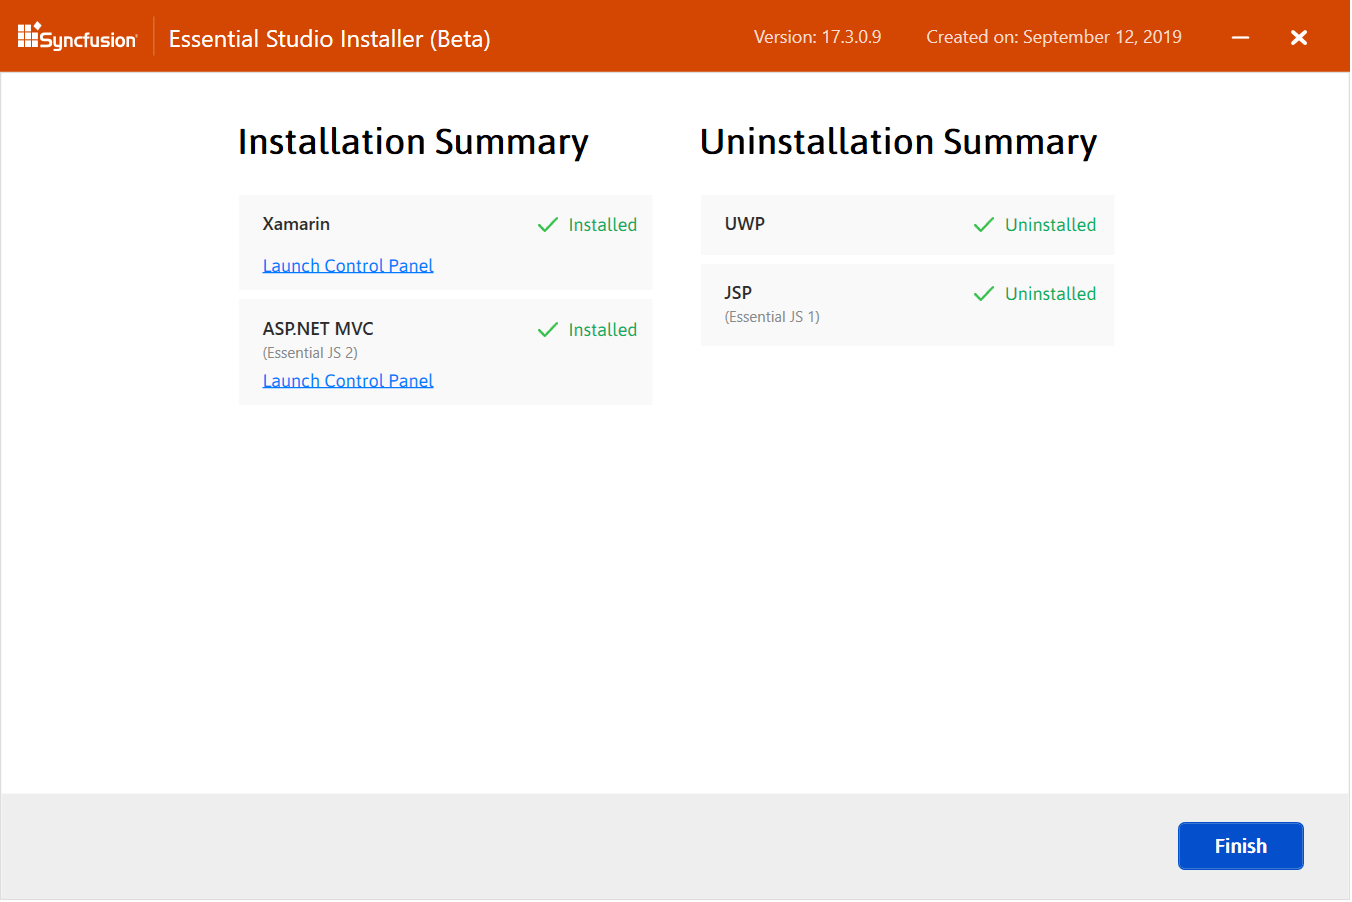 Installing and Uninstalling Platforms in One Step using Web Installer